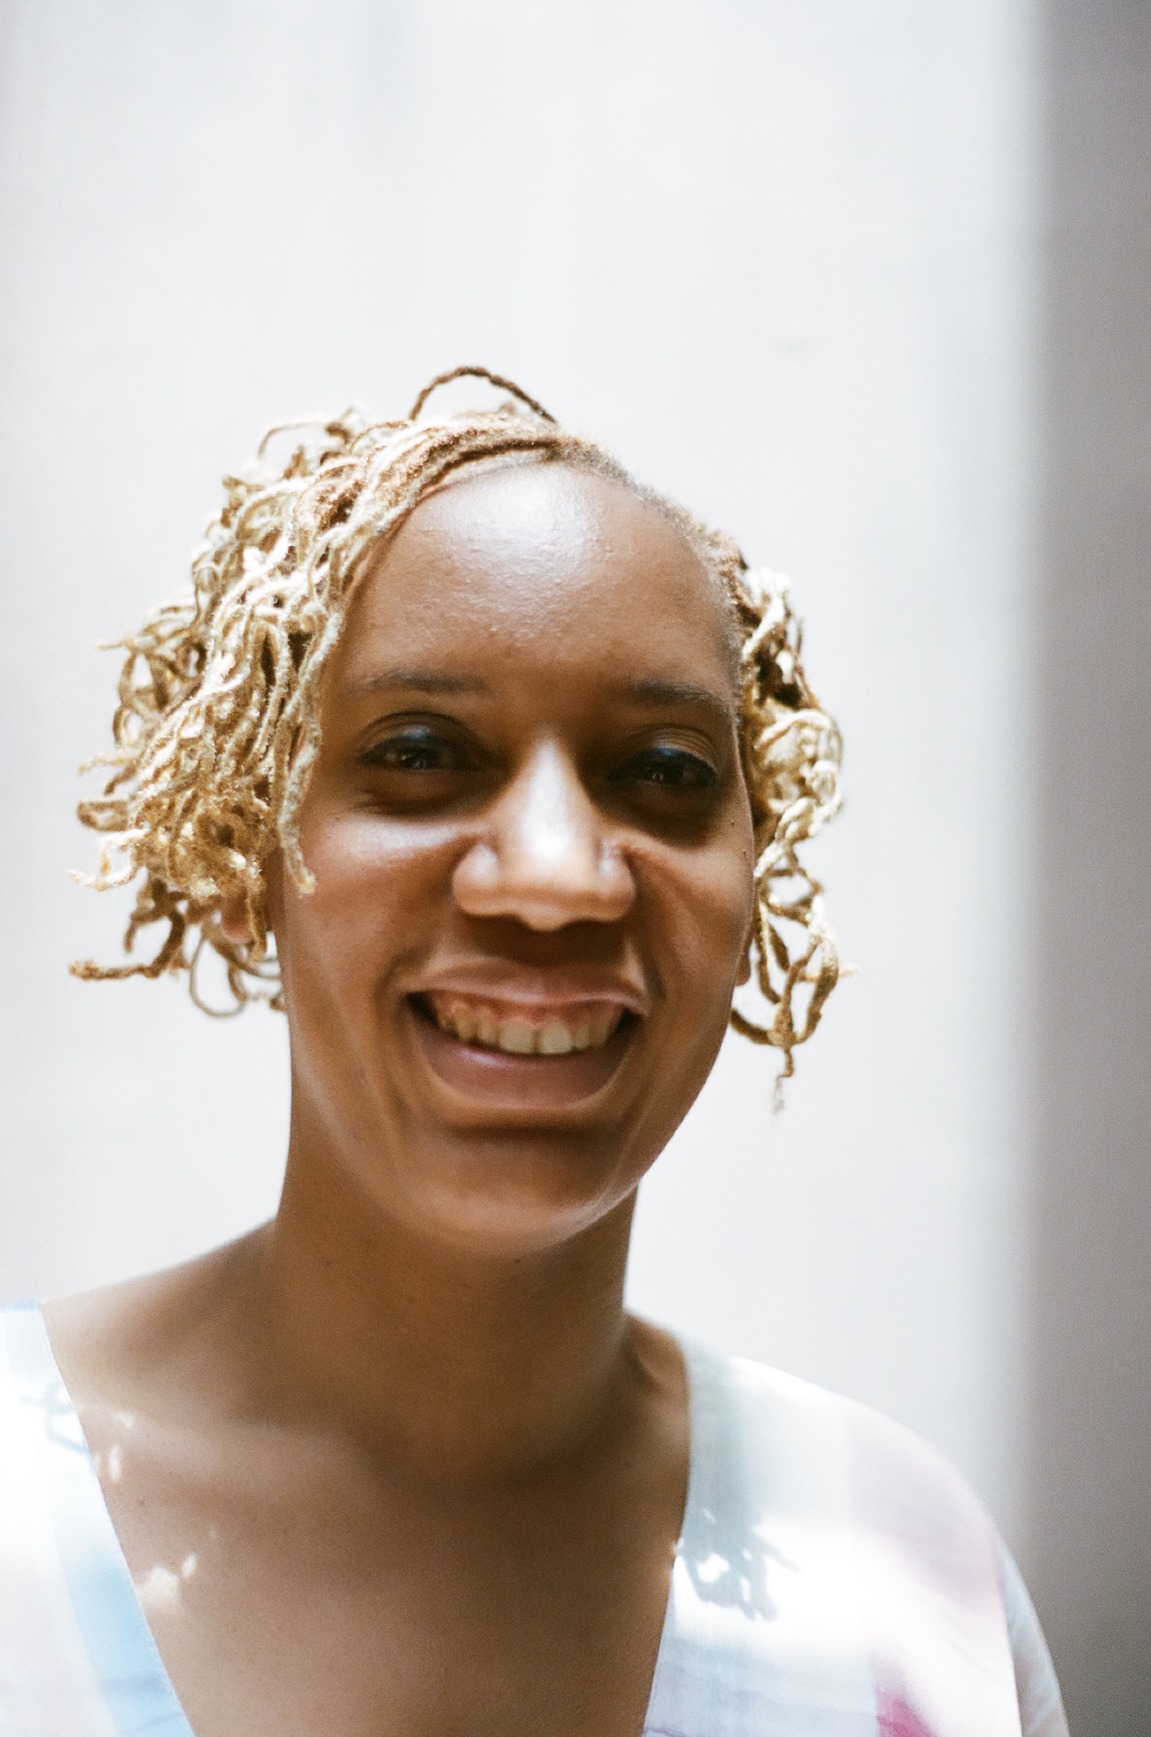 Photo portrait of young African woman smiling with blonde braids.